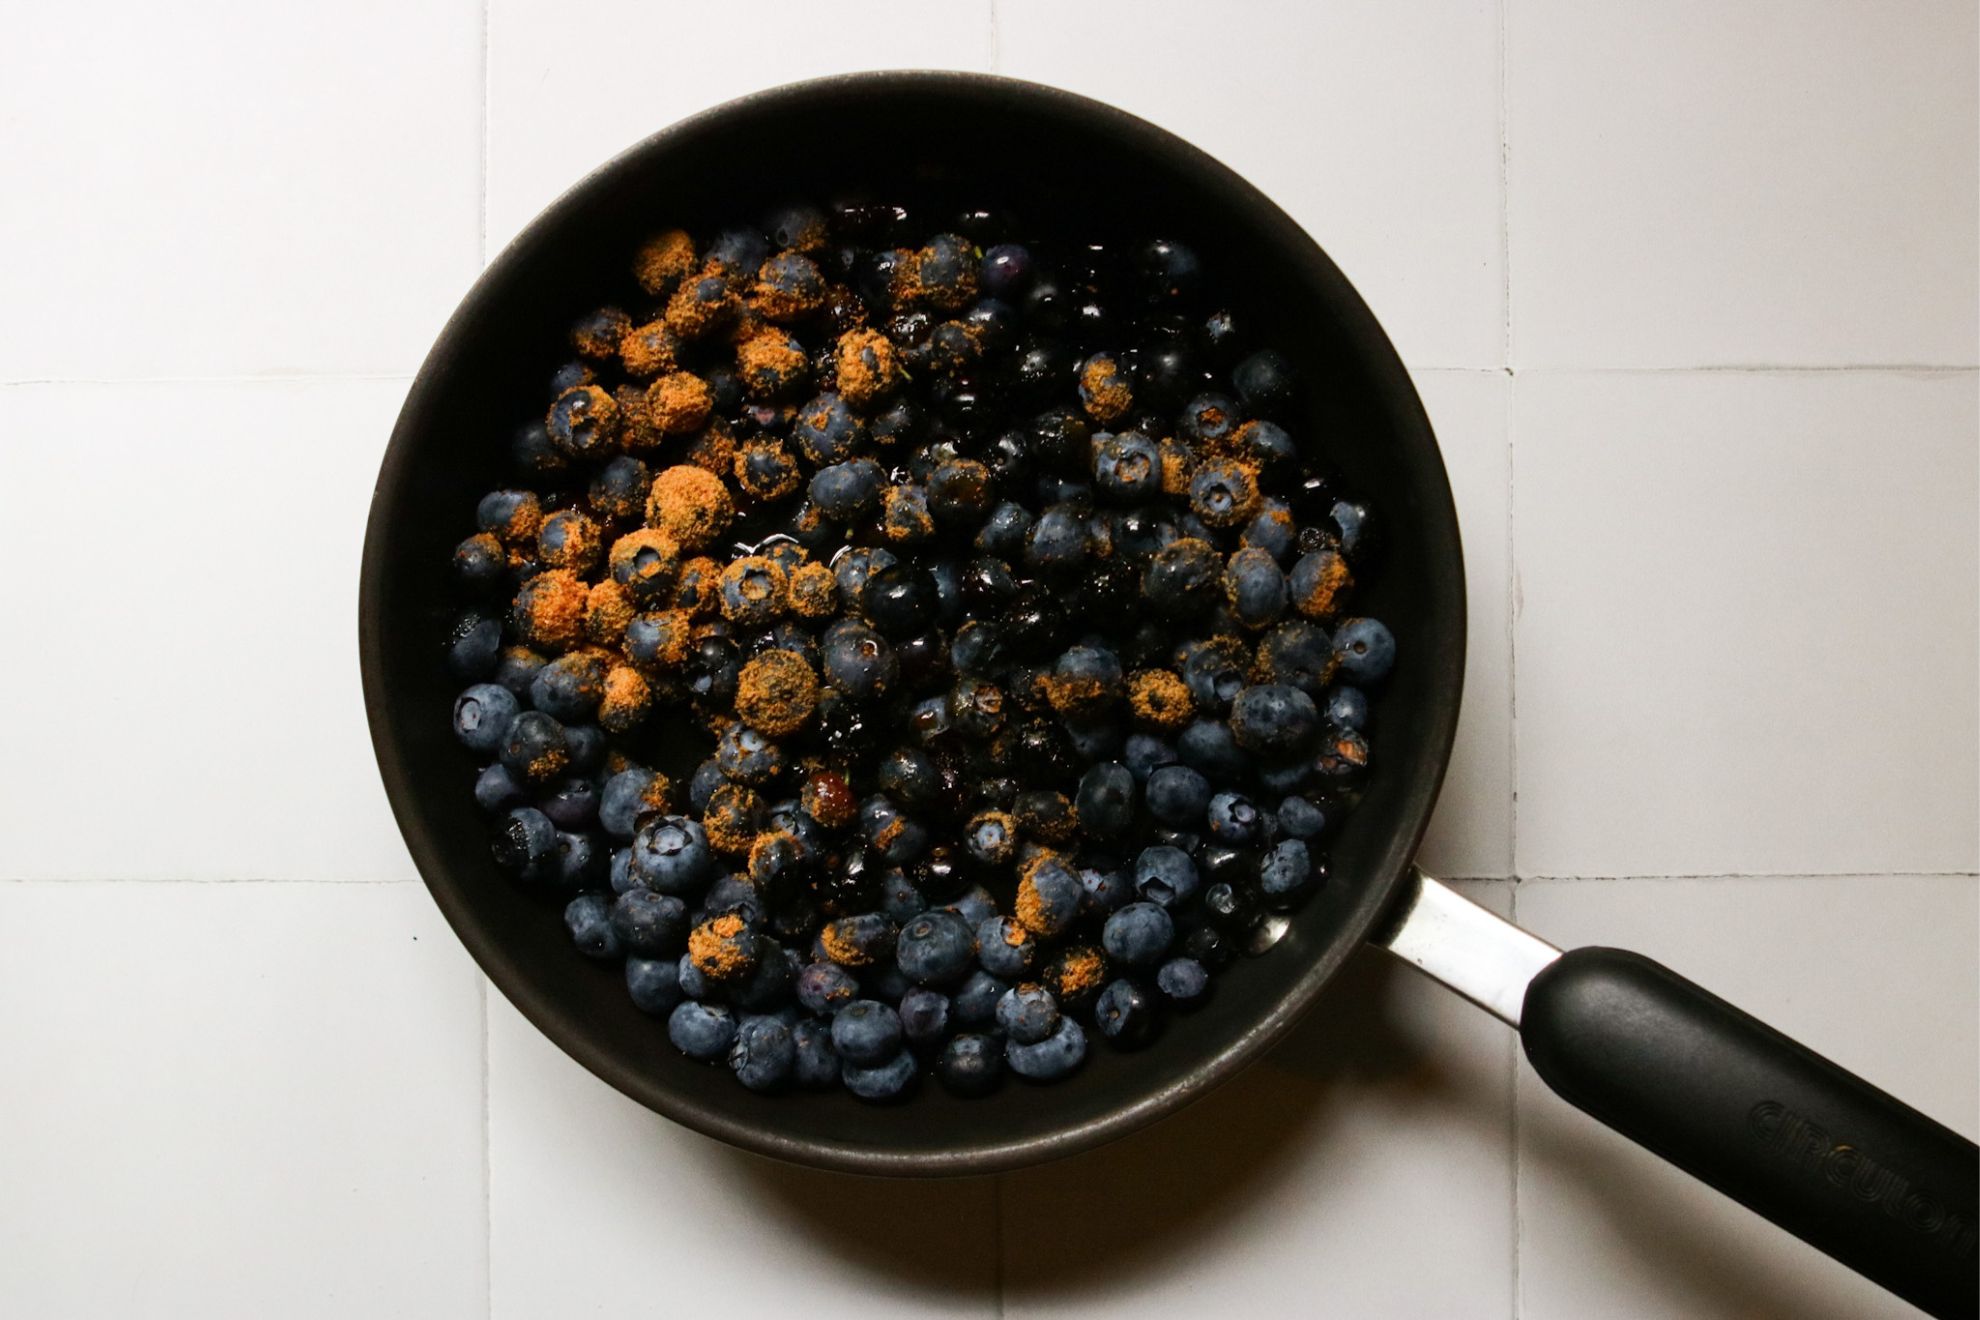 This is an overhead horizontal image of a small saucepan with blueberries and coconut sugar. Some of the blueberries in the pan appear to be wet. The handle of the pan is pointing to the bottom right corner of the image. The pan sits on a white square tile surface.